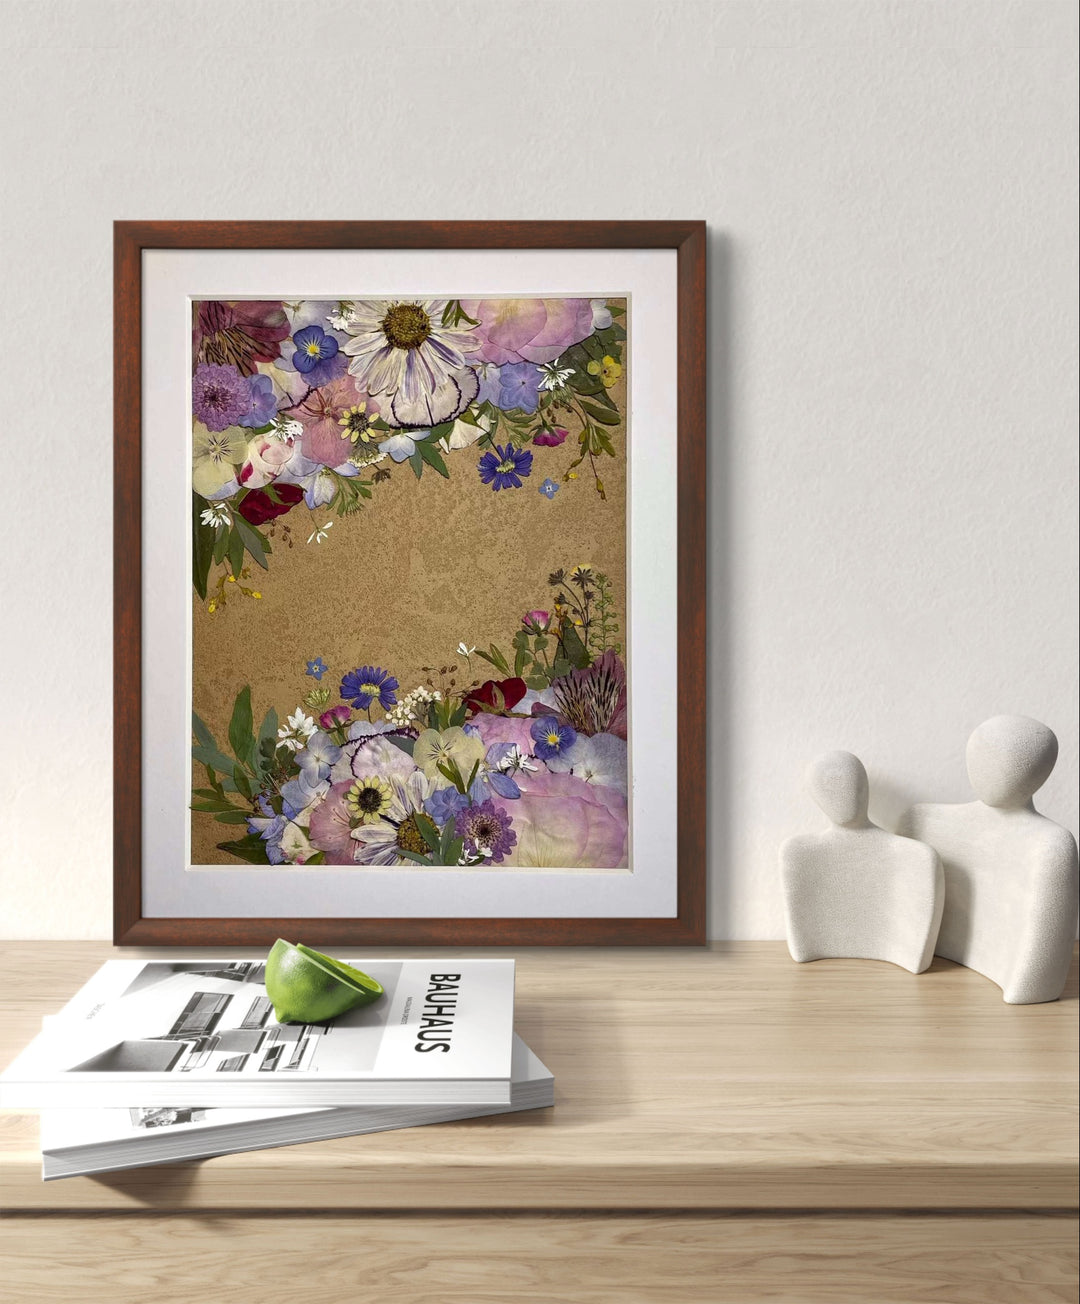 Garden symphony theme 11 inches width 12.5 inches height pressed flower frame art stands on the wood table.